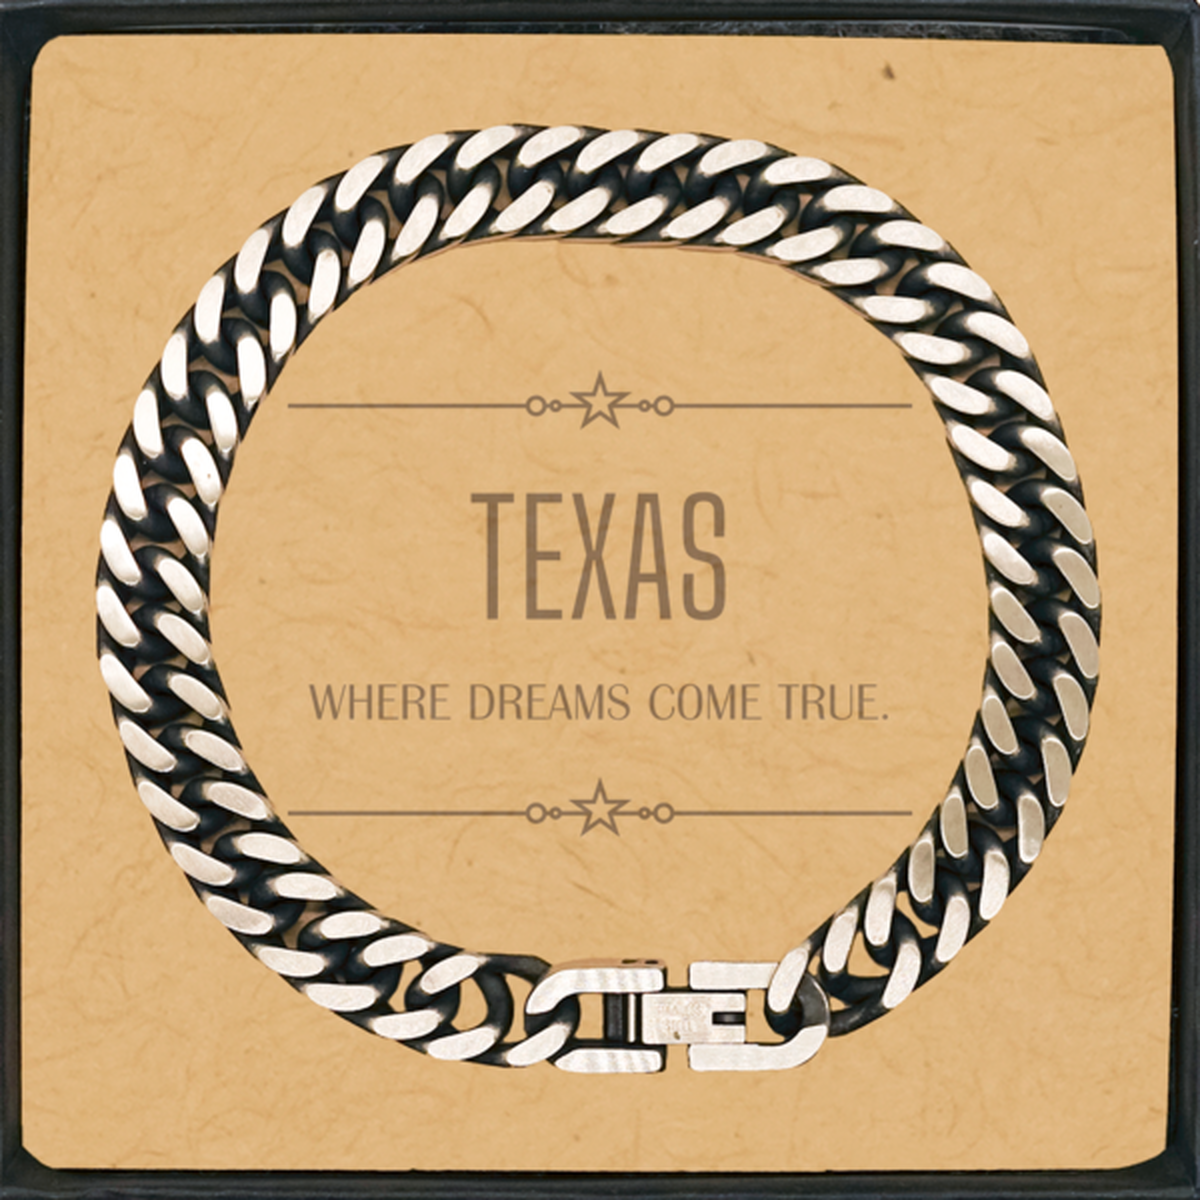 Love Texas State Cuban Link Chain Bracelet, Texas Where dreams come true, Birthday Inspirational Gifts For Texas Men, Women, Friends